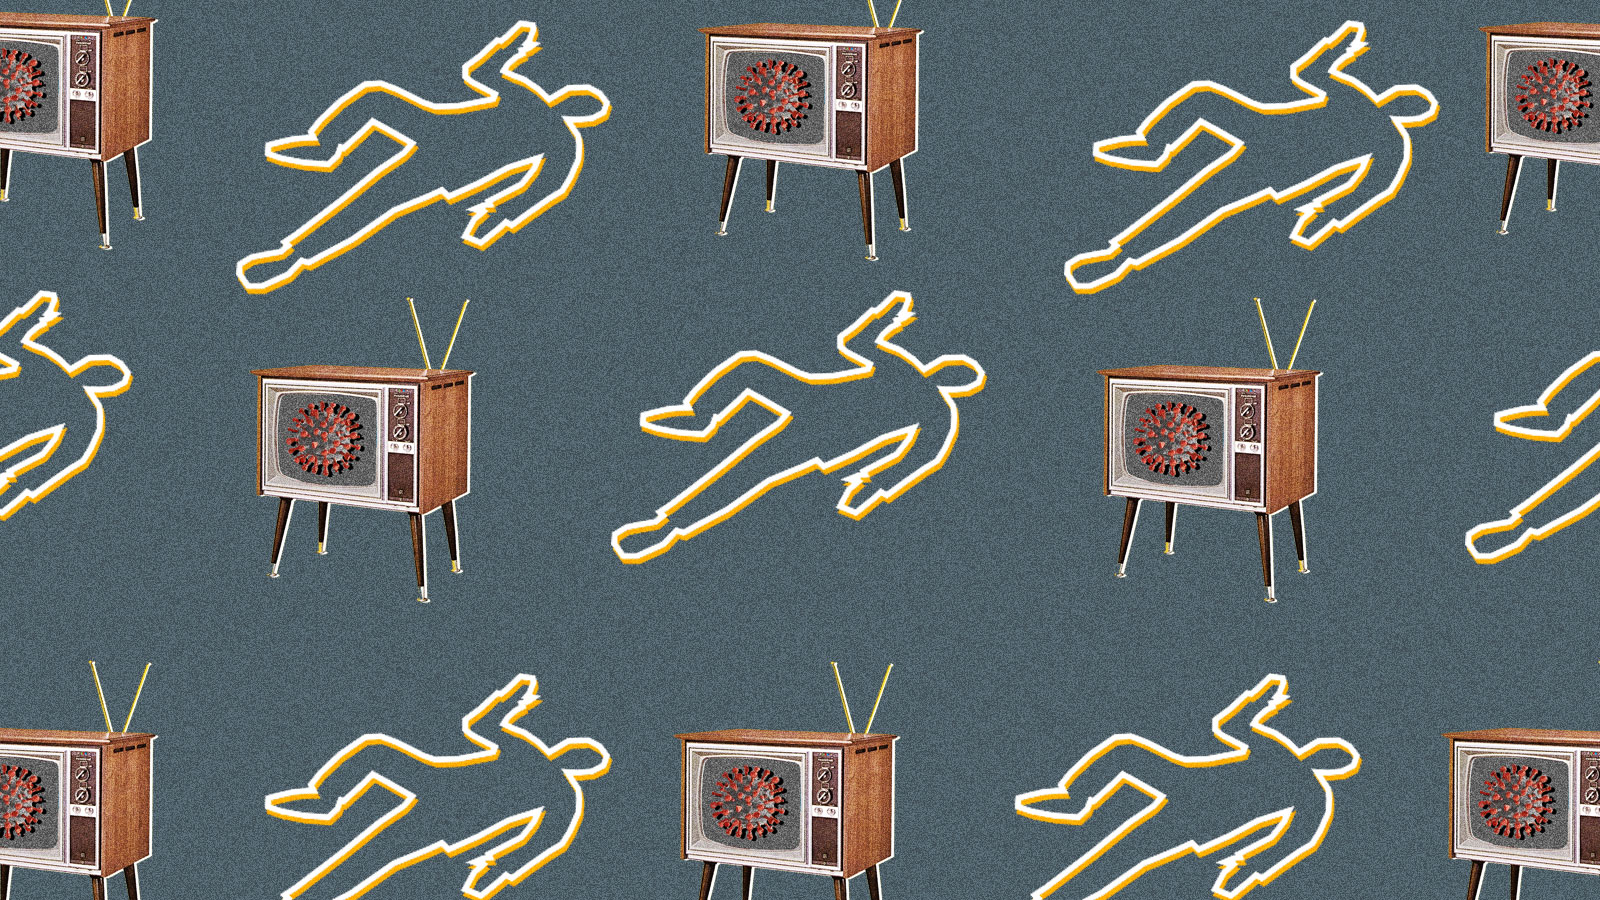 A repeating pattern of body outlines and televisions with the coronavirus on the screen